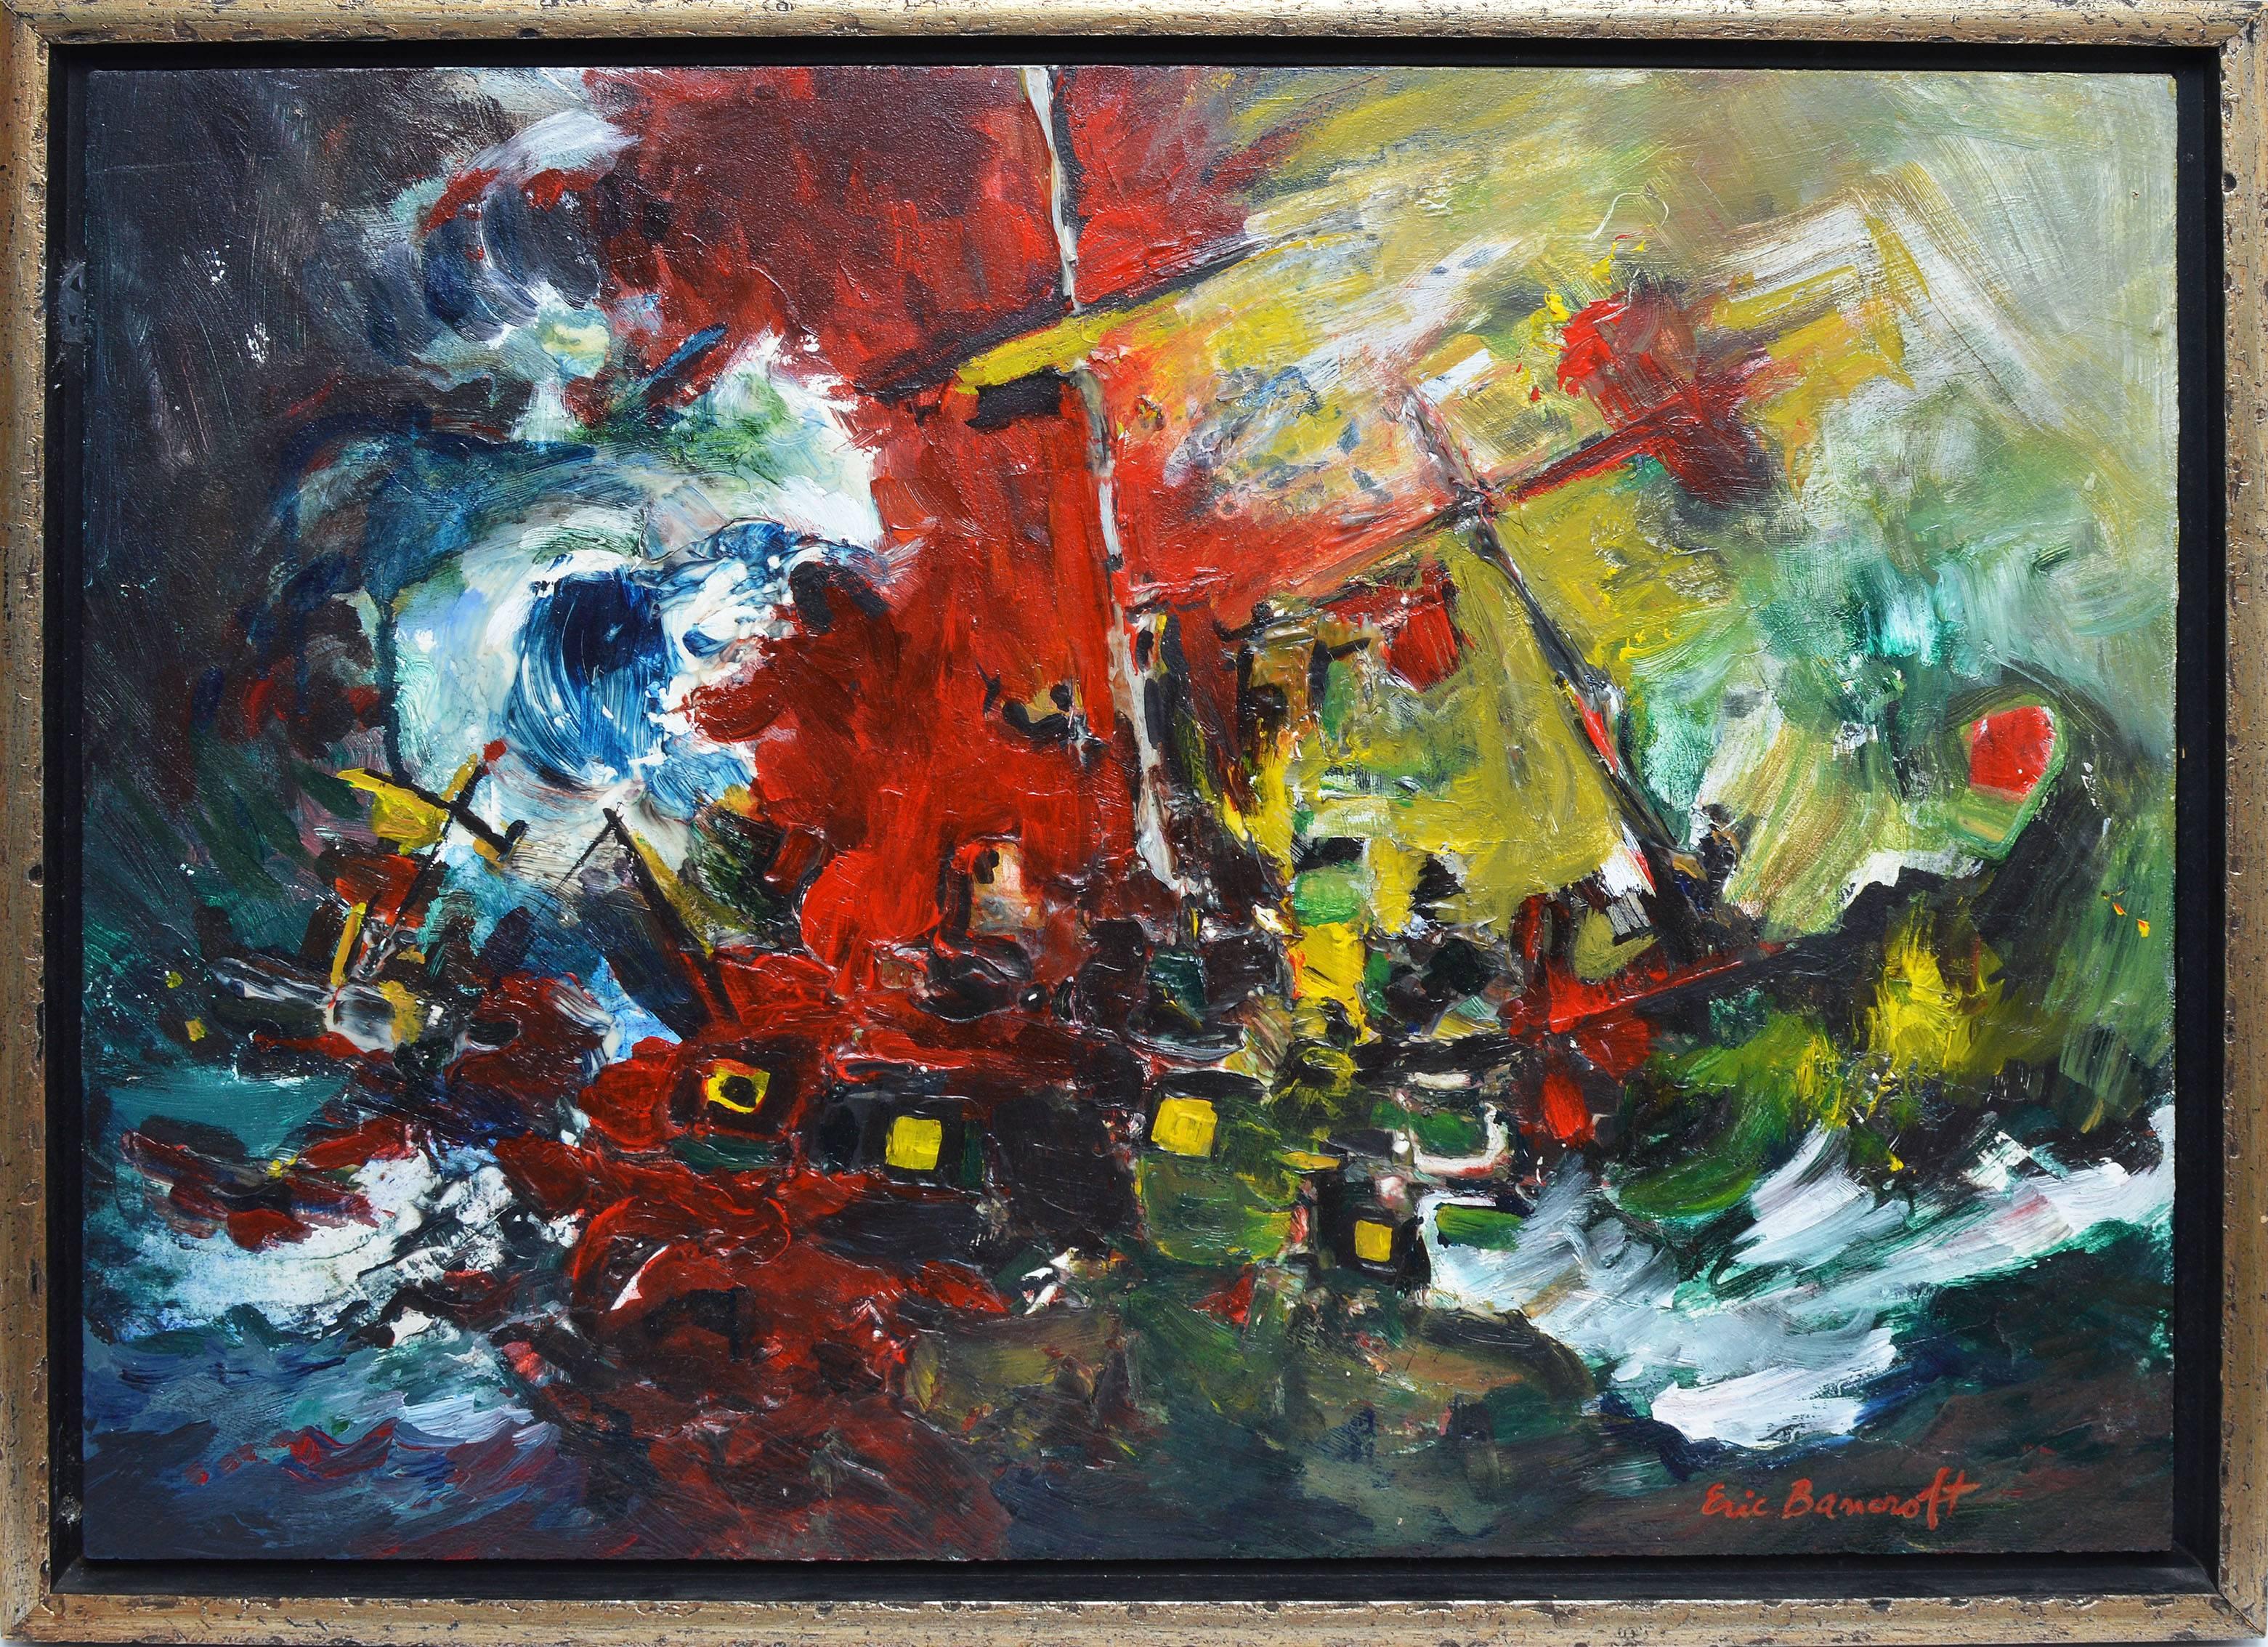 Abstract Expressionist composition by Eric Bancroft.  Titled &quot;The Lord Nelson&quot; on verso.  Oil on board, circa 1967.  Displayed in a silver modernist frame.  Image size, 24&quot;L x 18.5&quot;H, overall 26&quot;L x 20.5&quot;H.